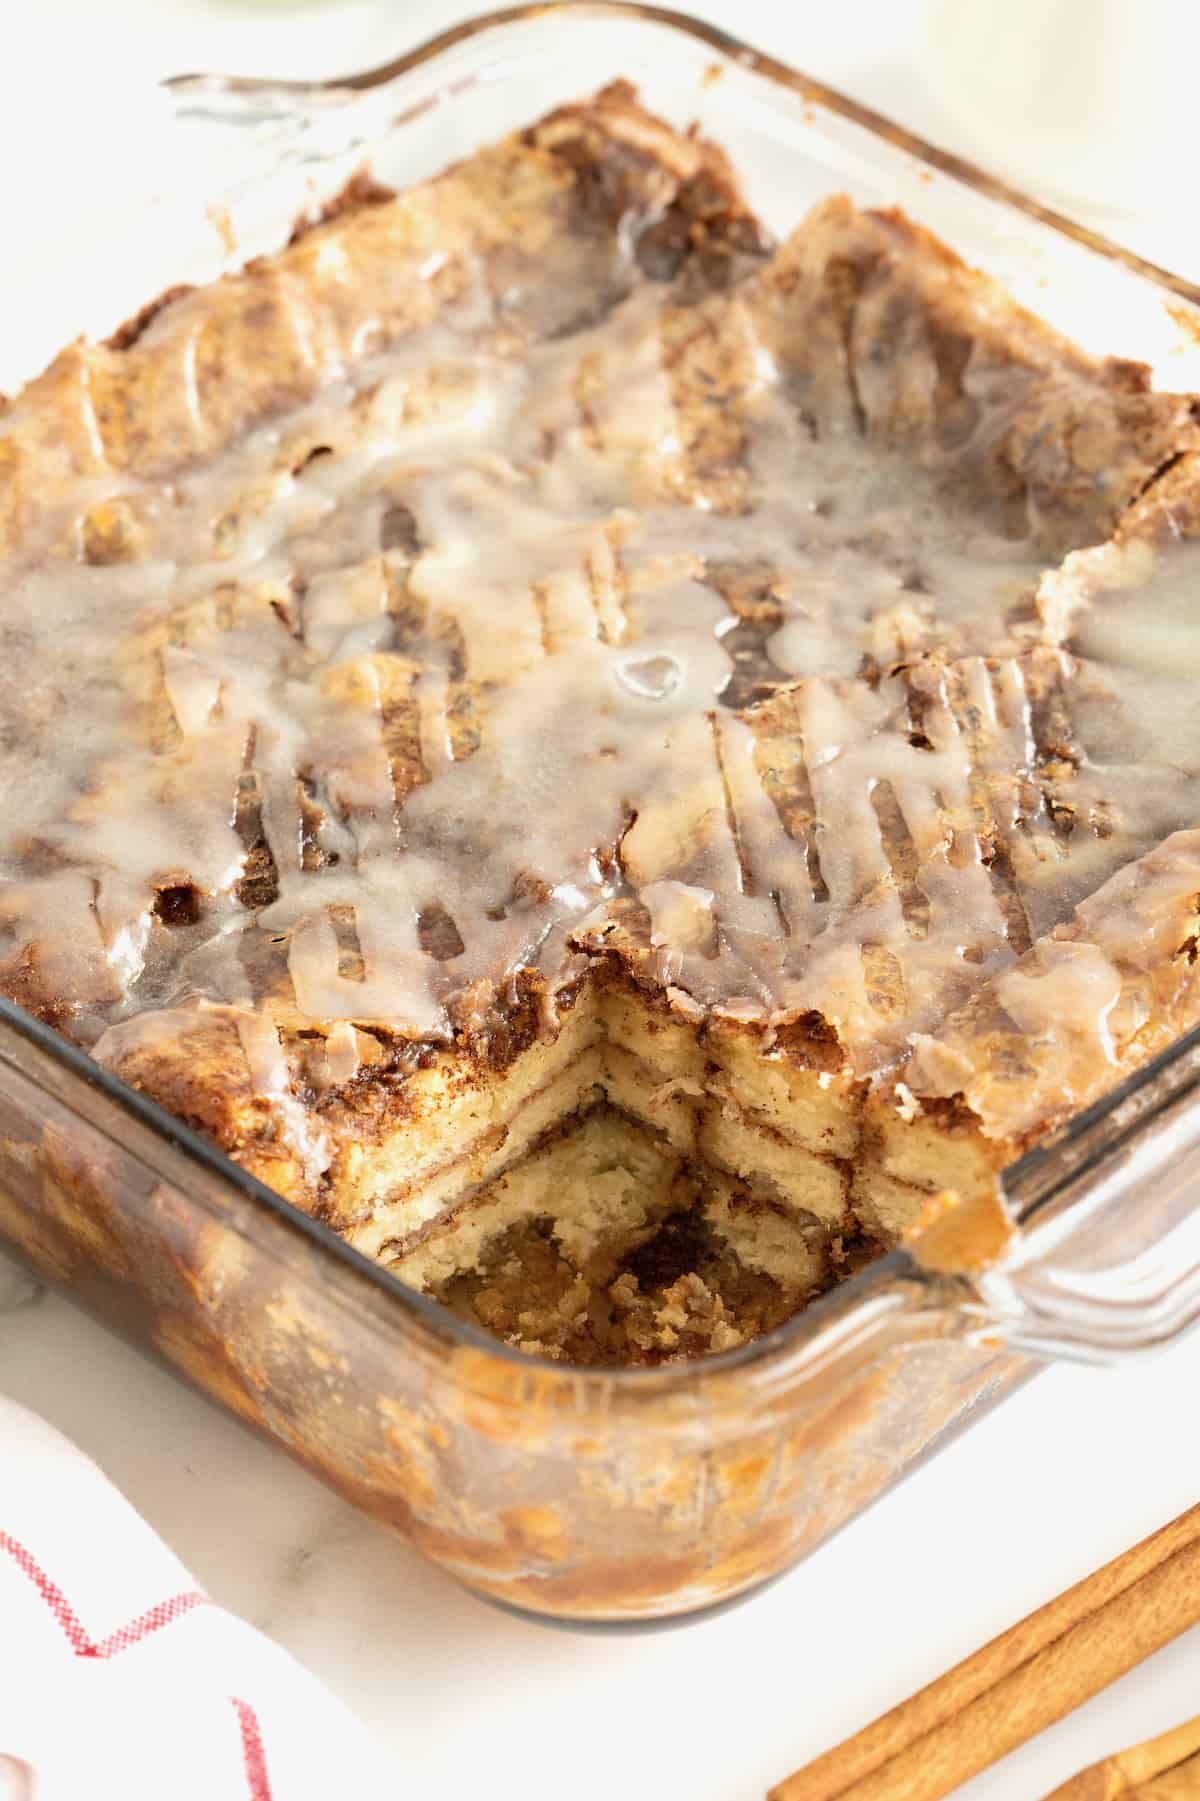 A square glass baking dish of cinnamon roll lasagna. The bottom right square piece is missing.